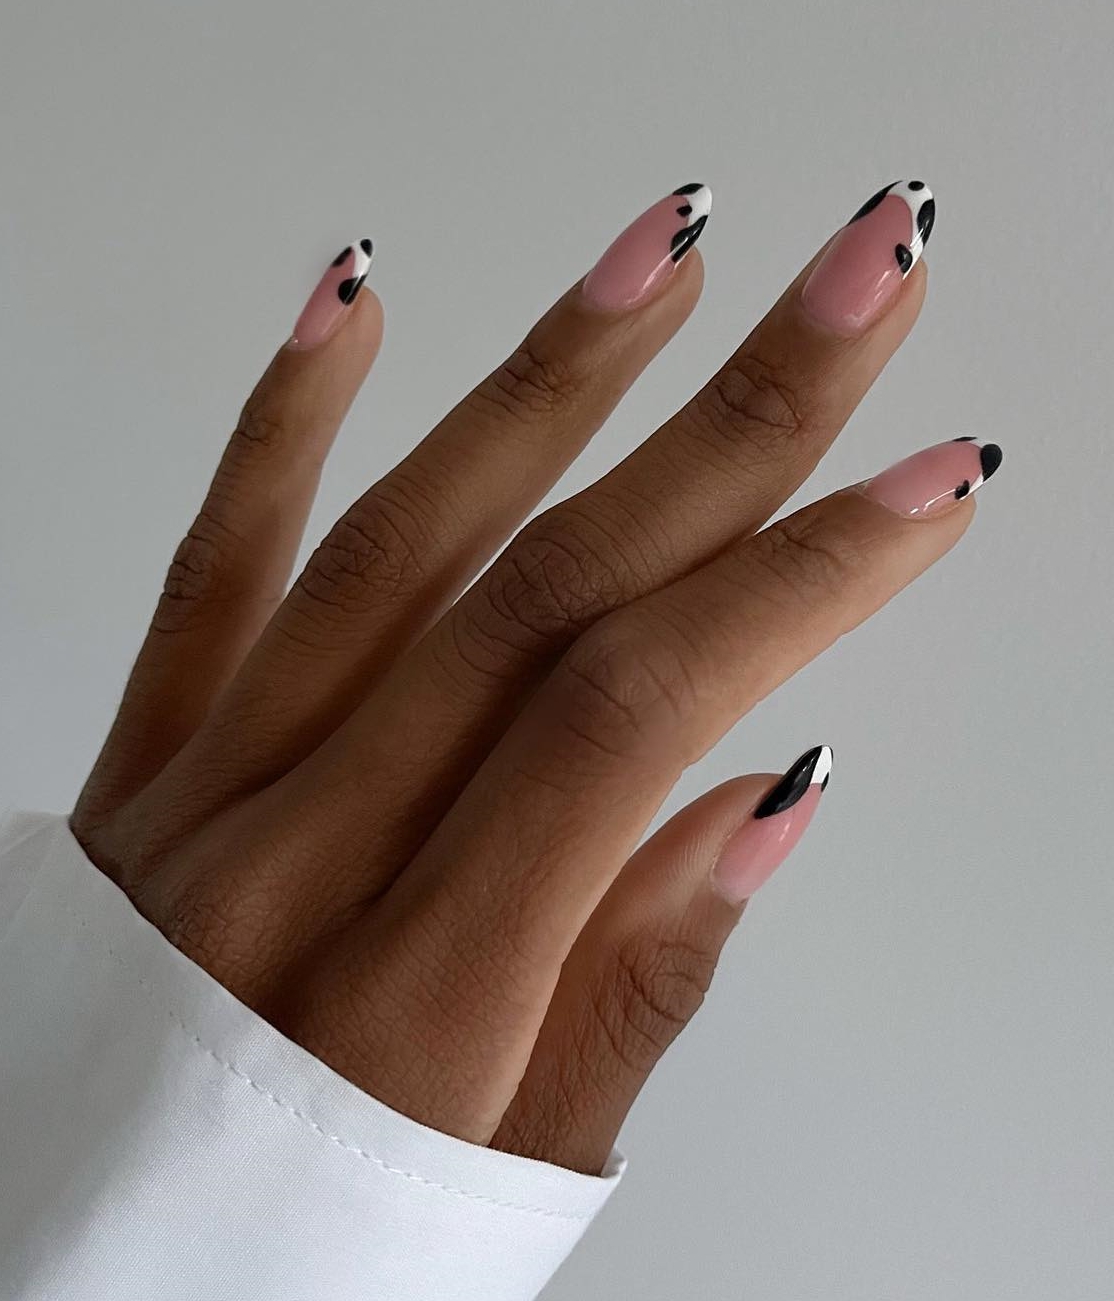 French Nail Tips with Black and White Cow Print Design